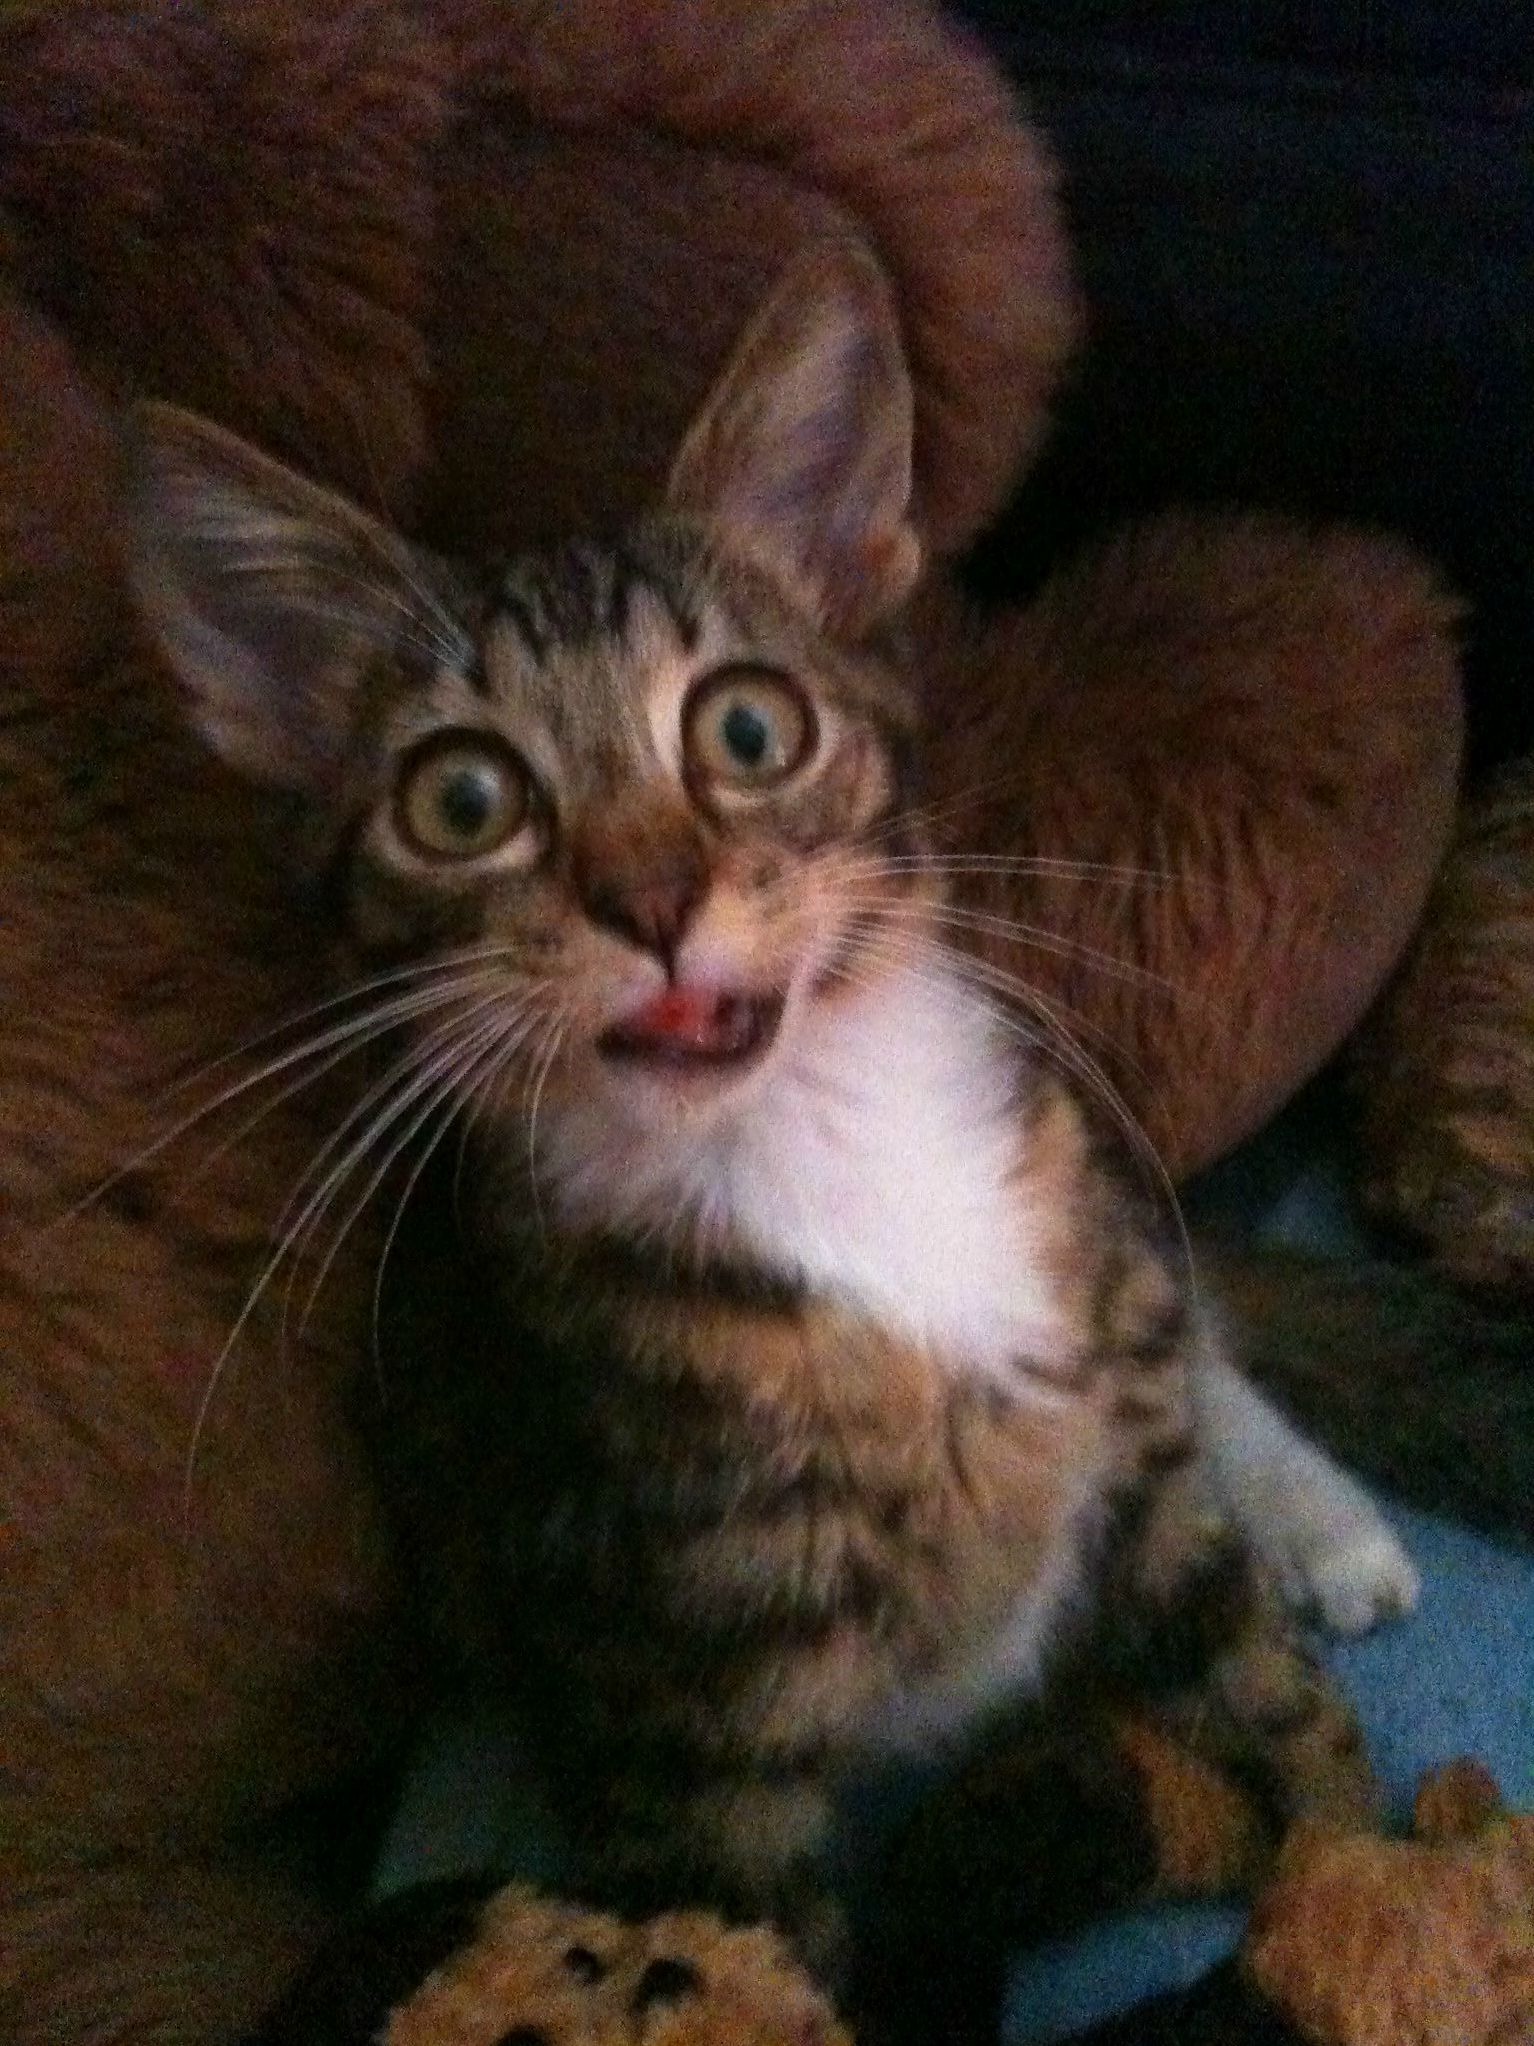 4 years ago axl was found inside a car and brought home. he was emaciated had a busted lip and a broken tail but was one of the cutest kittens i had ever seen.